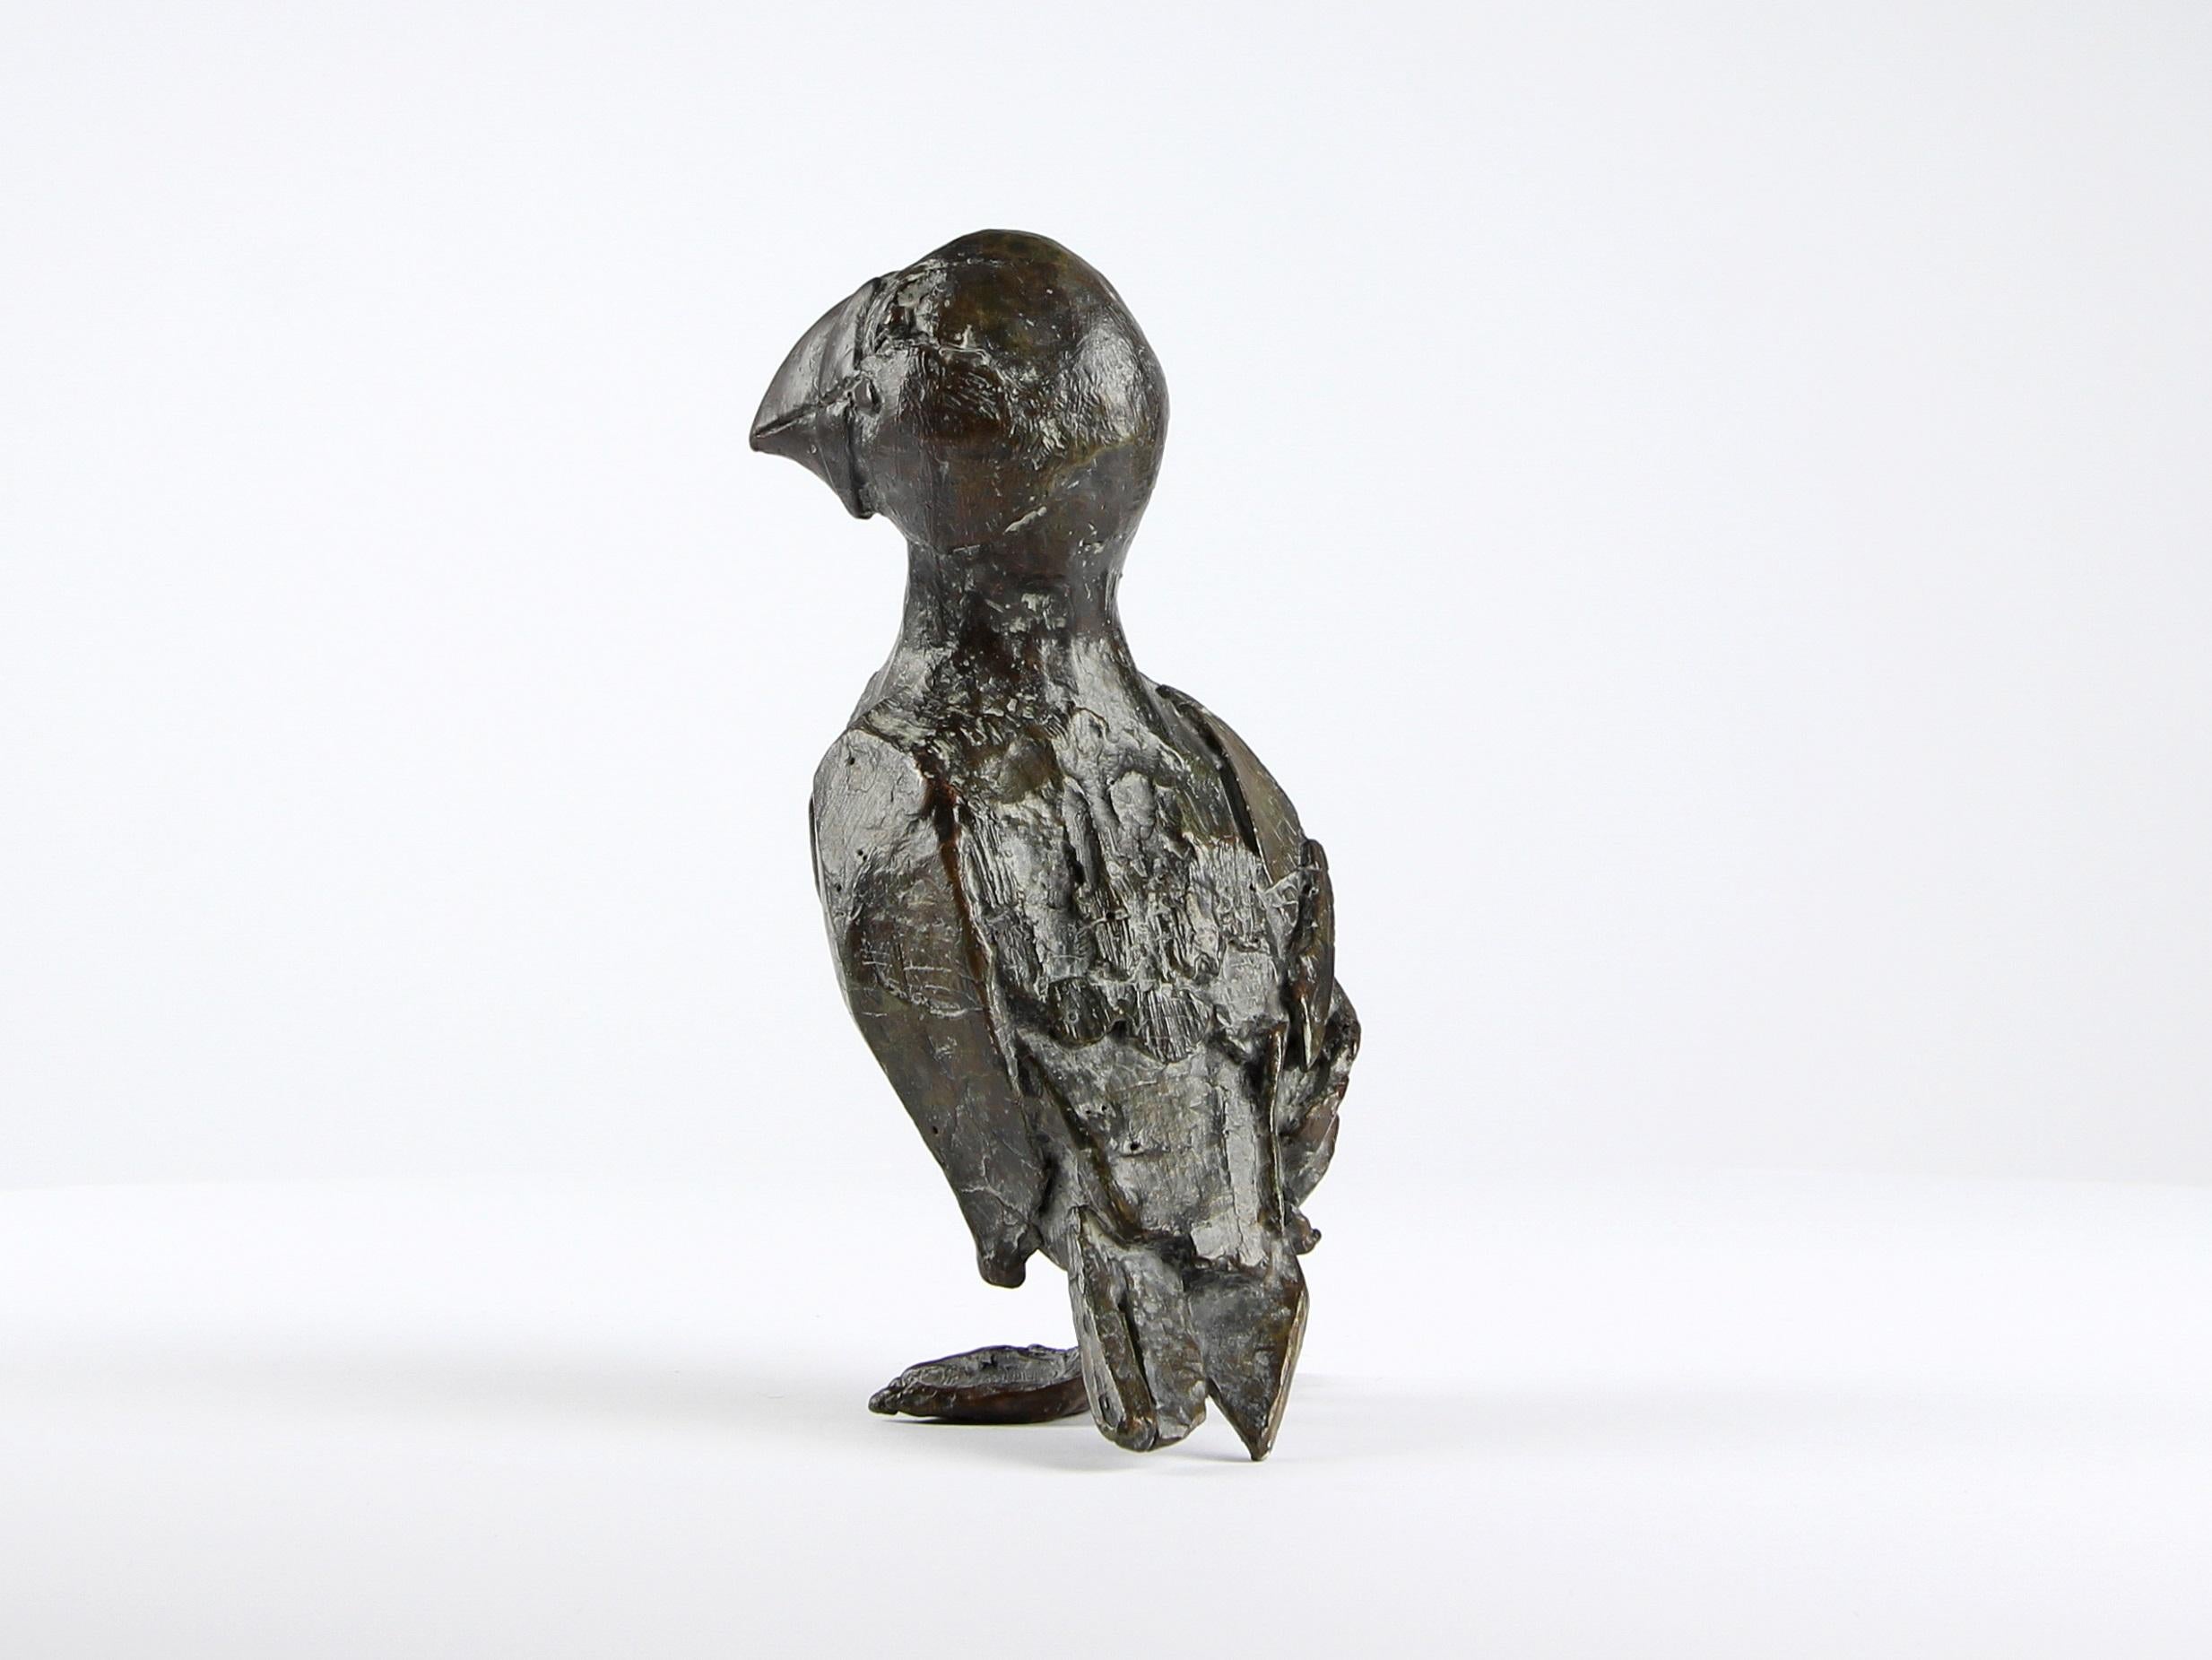 Puffin is a bronze sculpture by contemporary artist Chésade, dimensions are 18 × 10 × 9 cm (7.1 × 3.9 × 3.5 in). 
The sculpture is signed and numbered, it is part of a limited edition of 8 editions + 4 artist’s proofs, and comes with a certificate